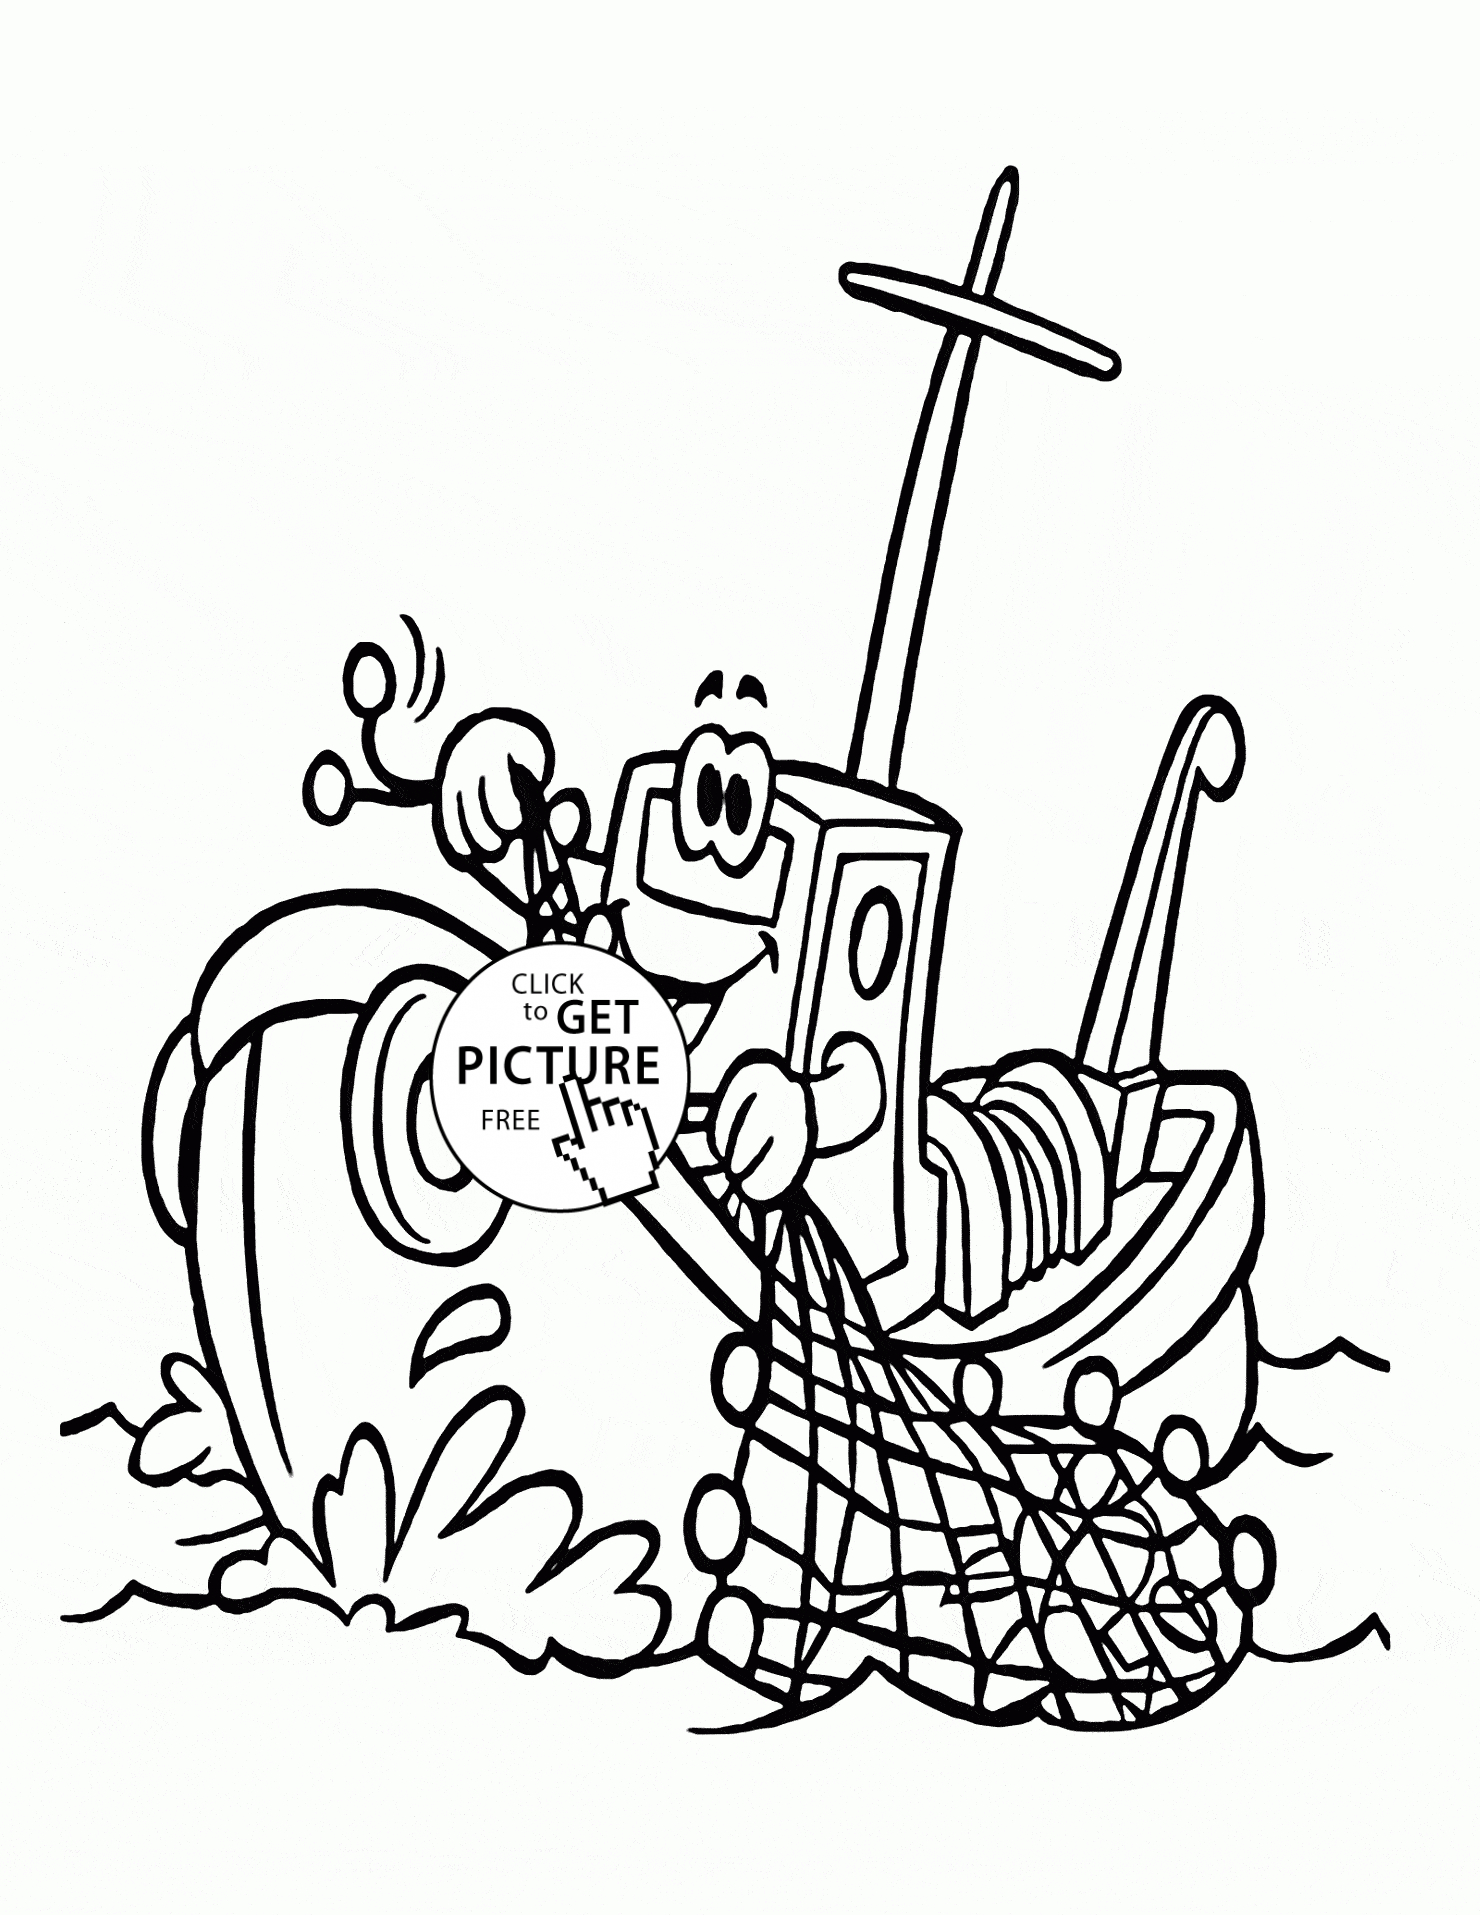 Coloring Pages Fishing Cartoon Fishing Boat Coloring Page For Kids Transportation Coloring